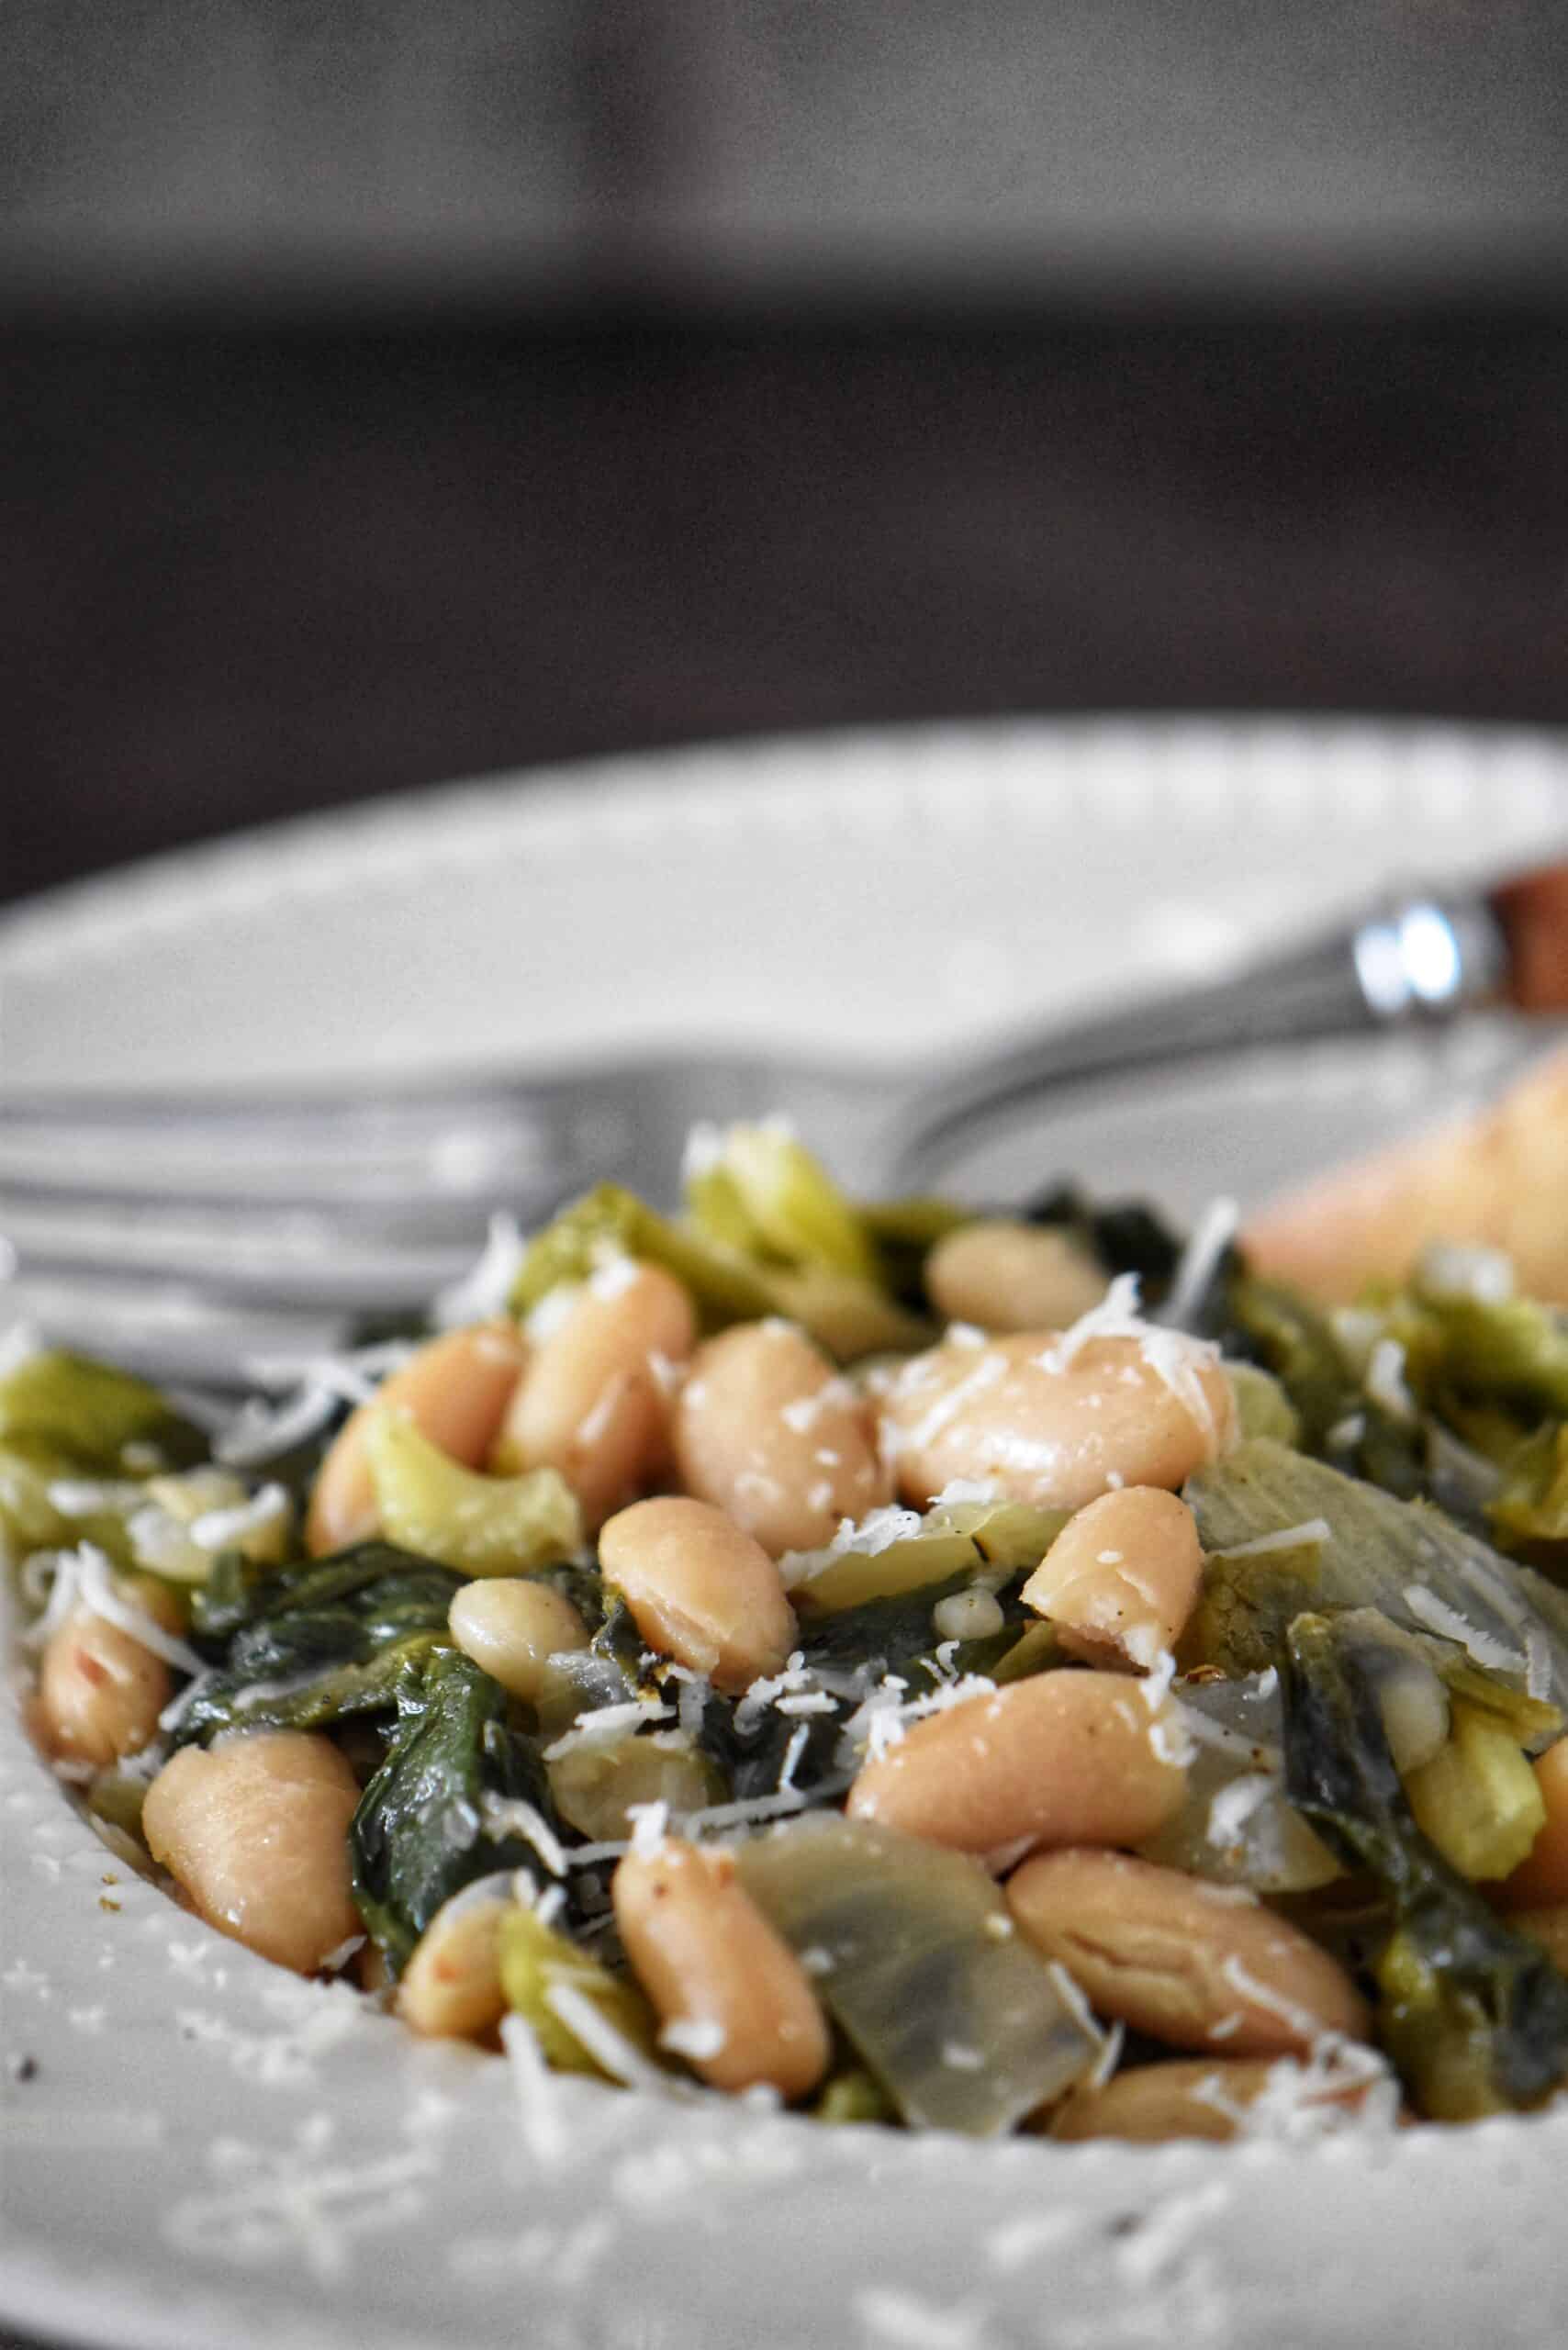 A close-up photo of beans and greens (Italian escarole) in a bowl.